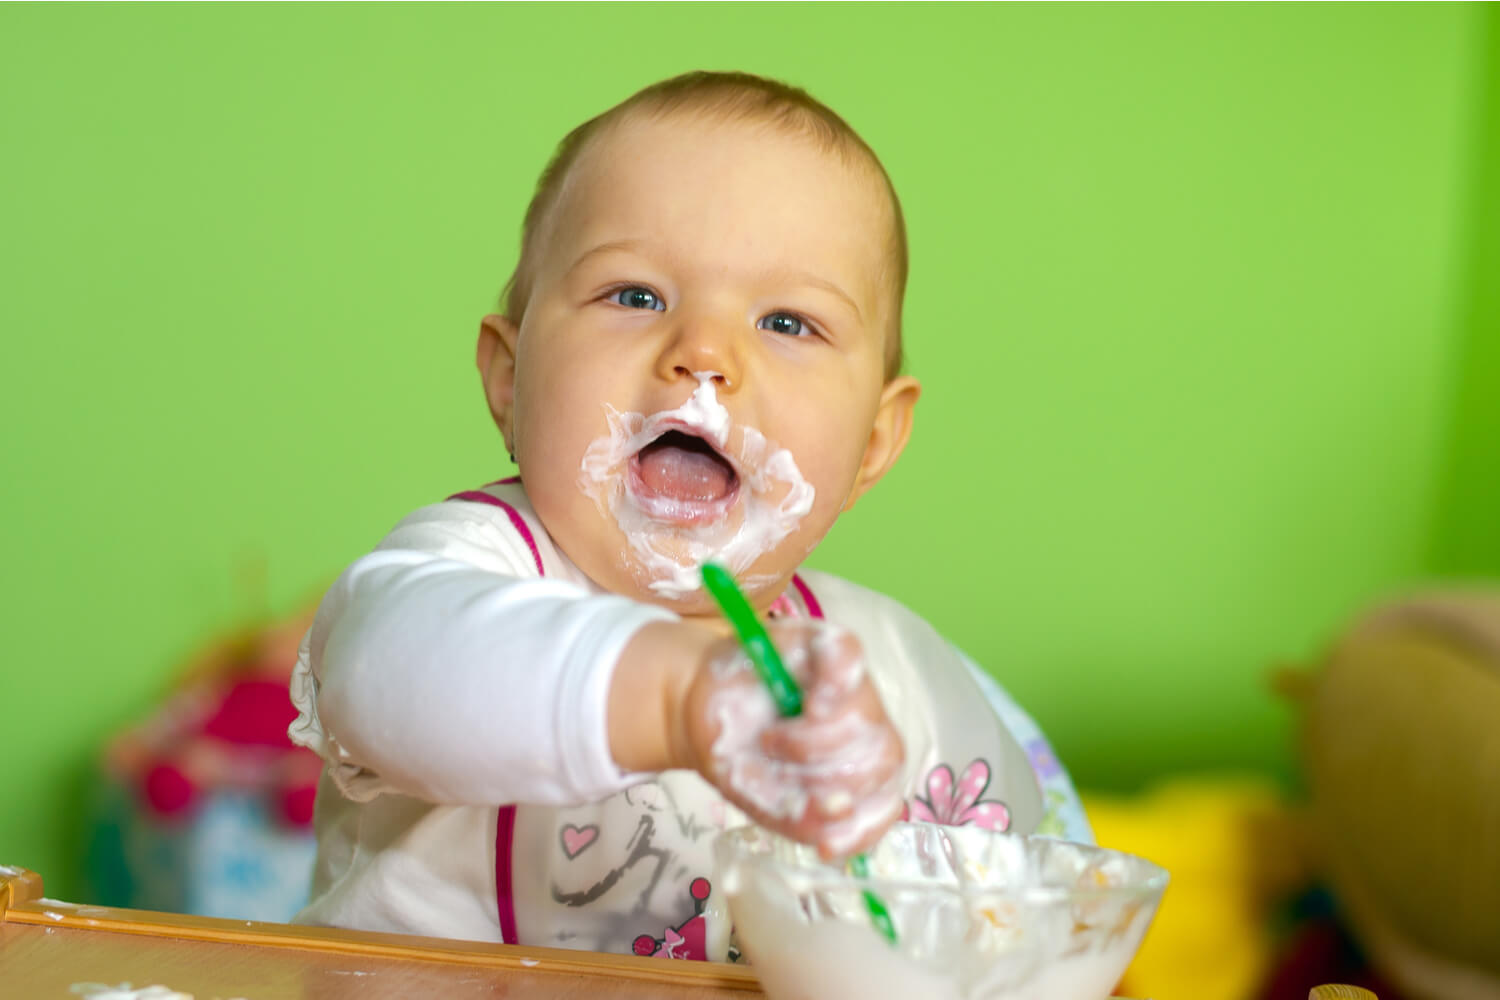 Is It Okay To Give Yogurt To Baby When They Have A Cold? - Being The Parent